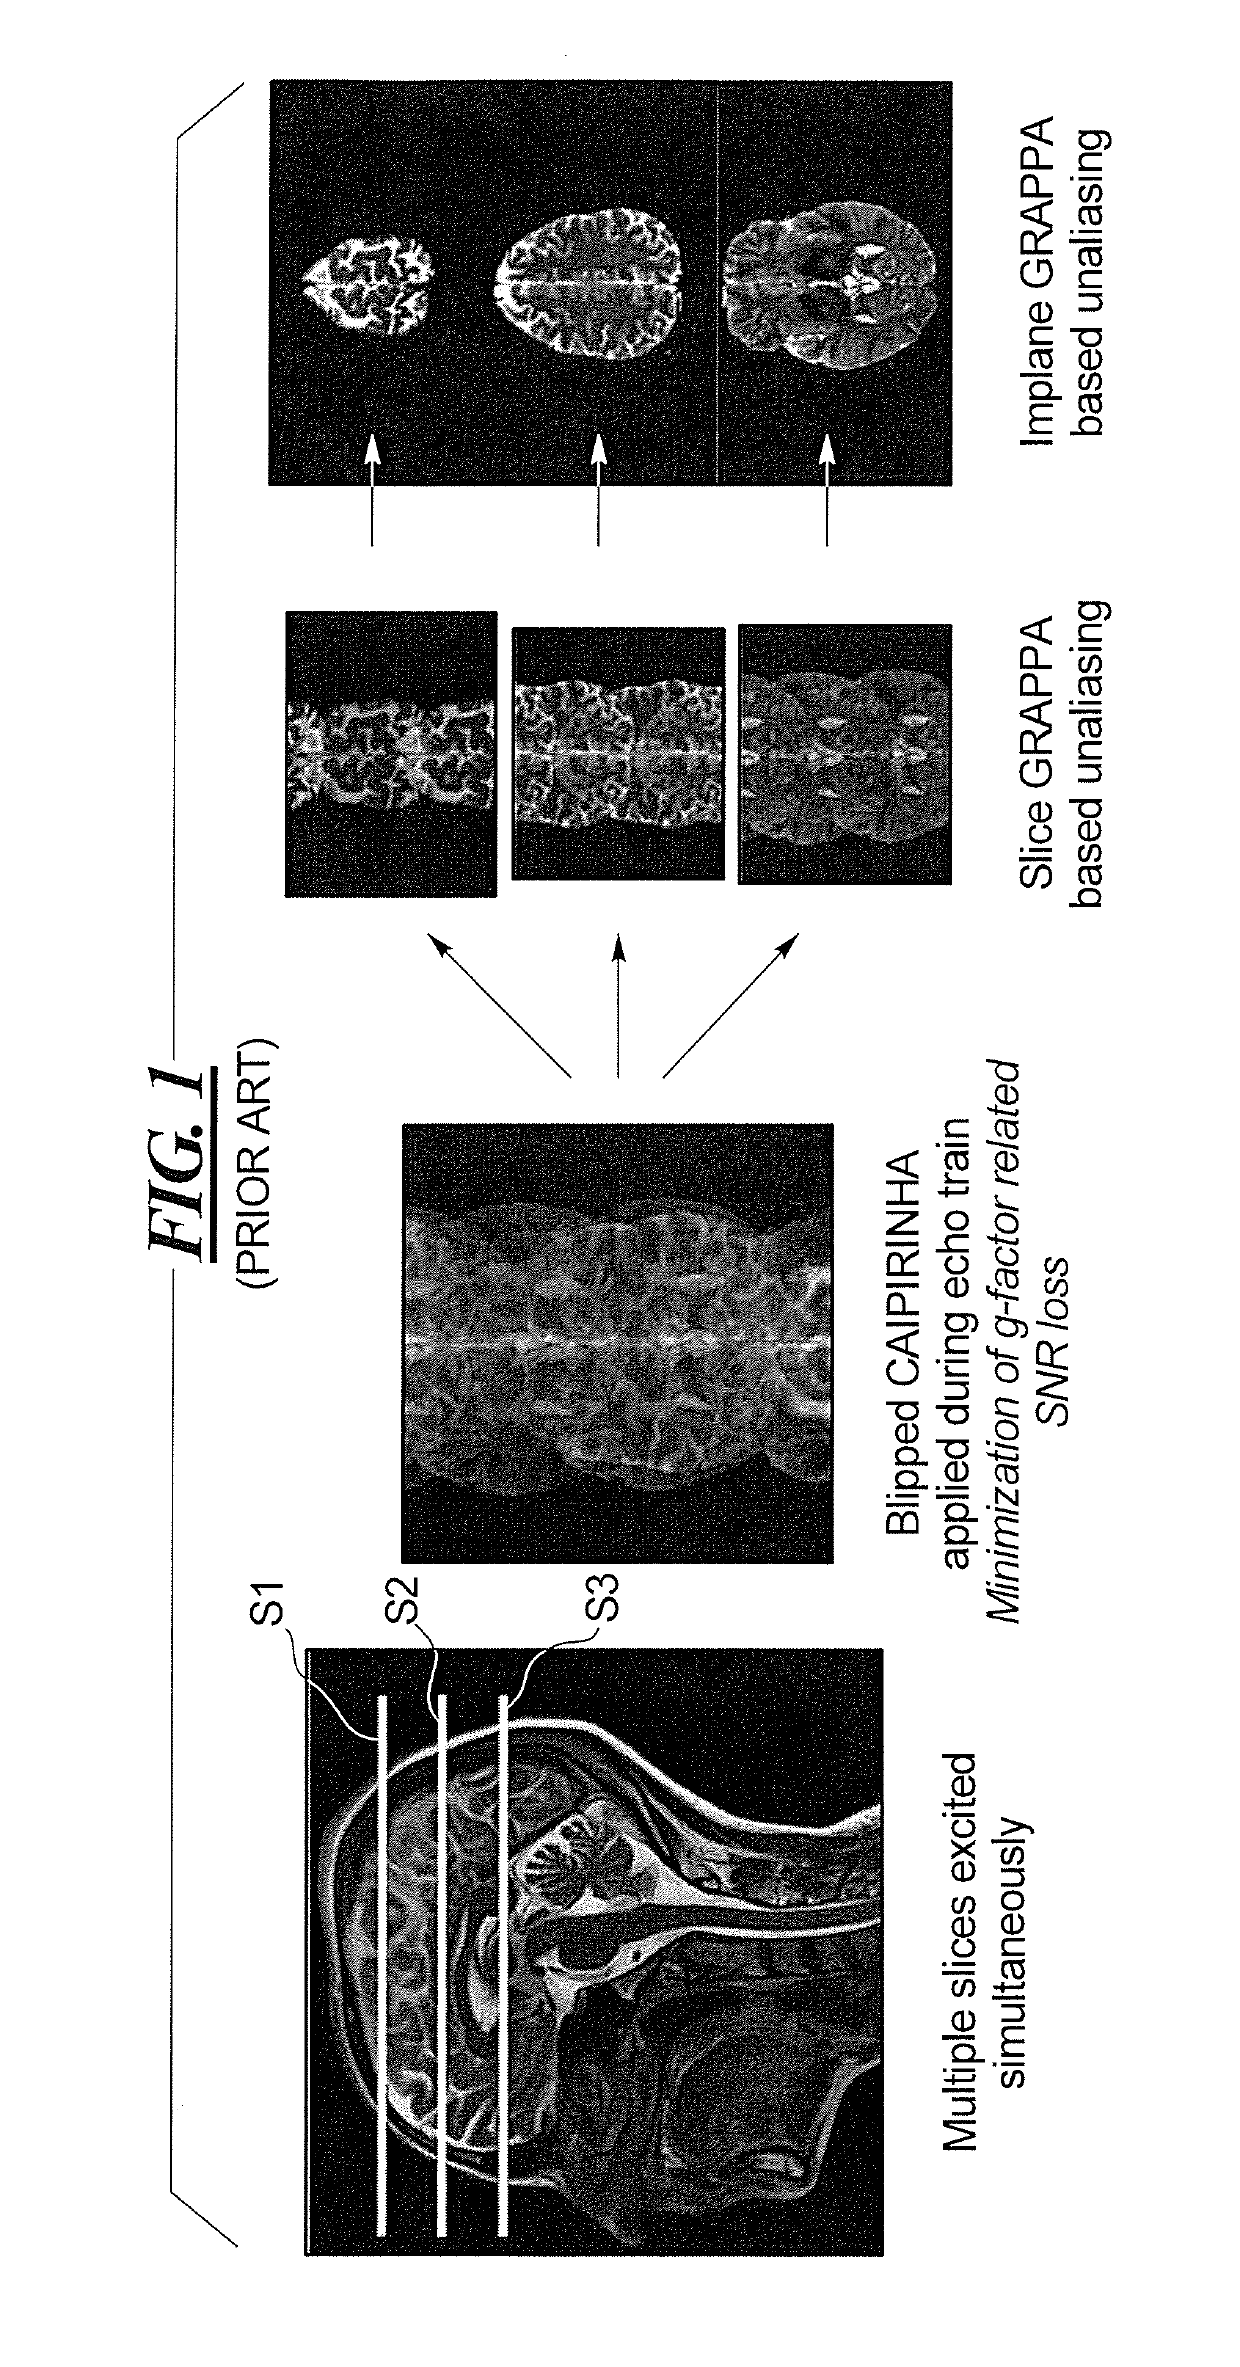 Magnetic resonance apparatus and method for simultaneous multi-contrast acquisition with simultaneous multislice imaging